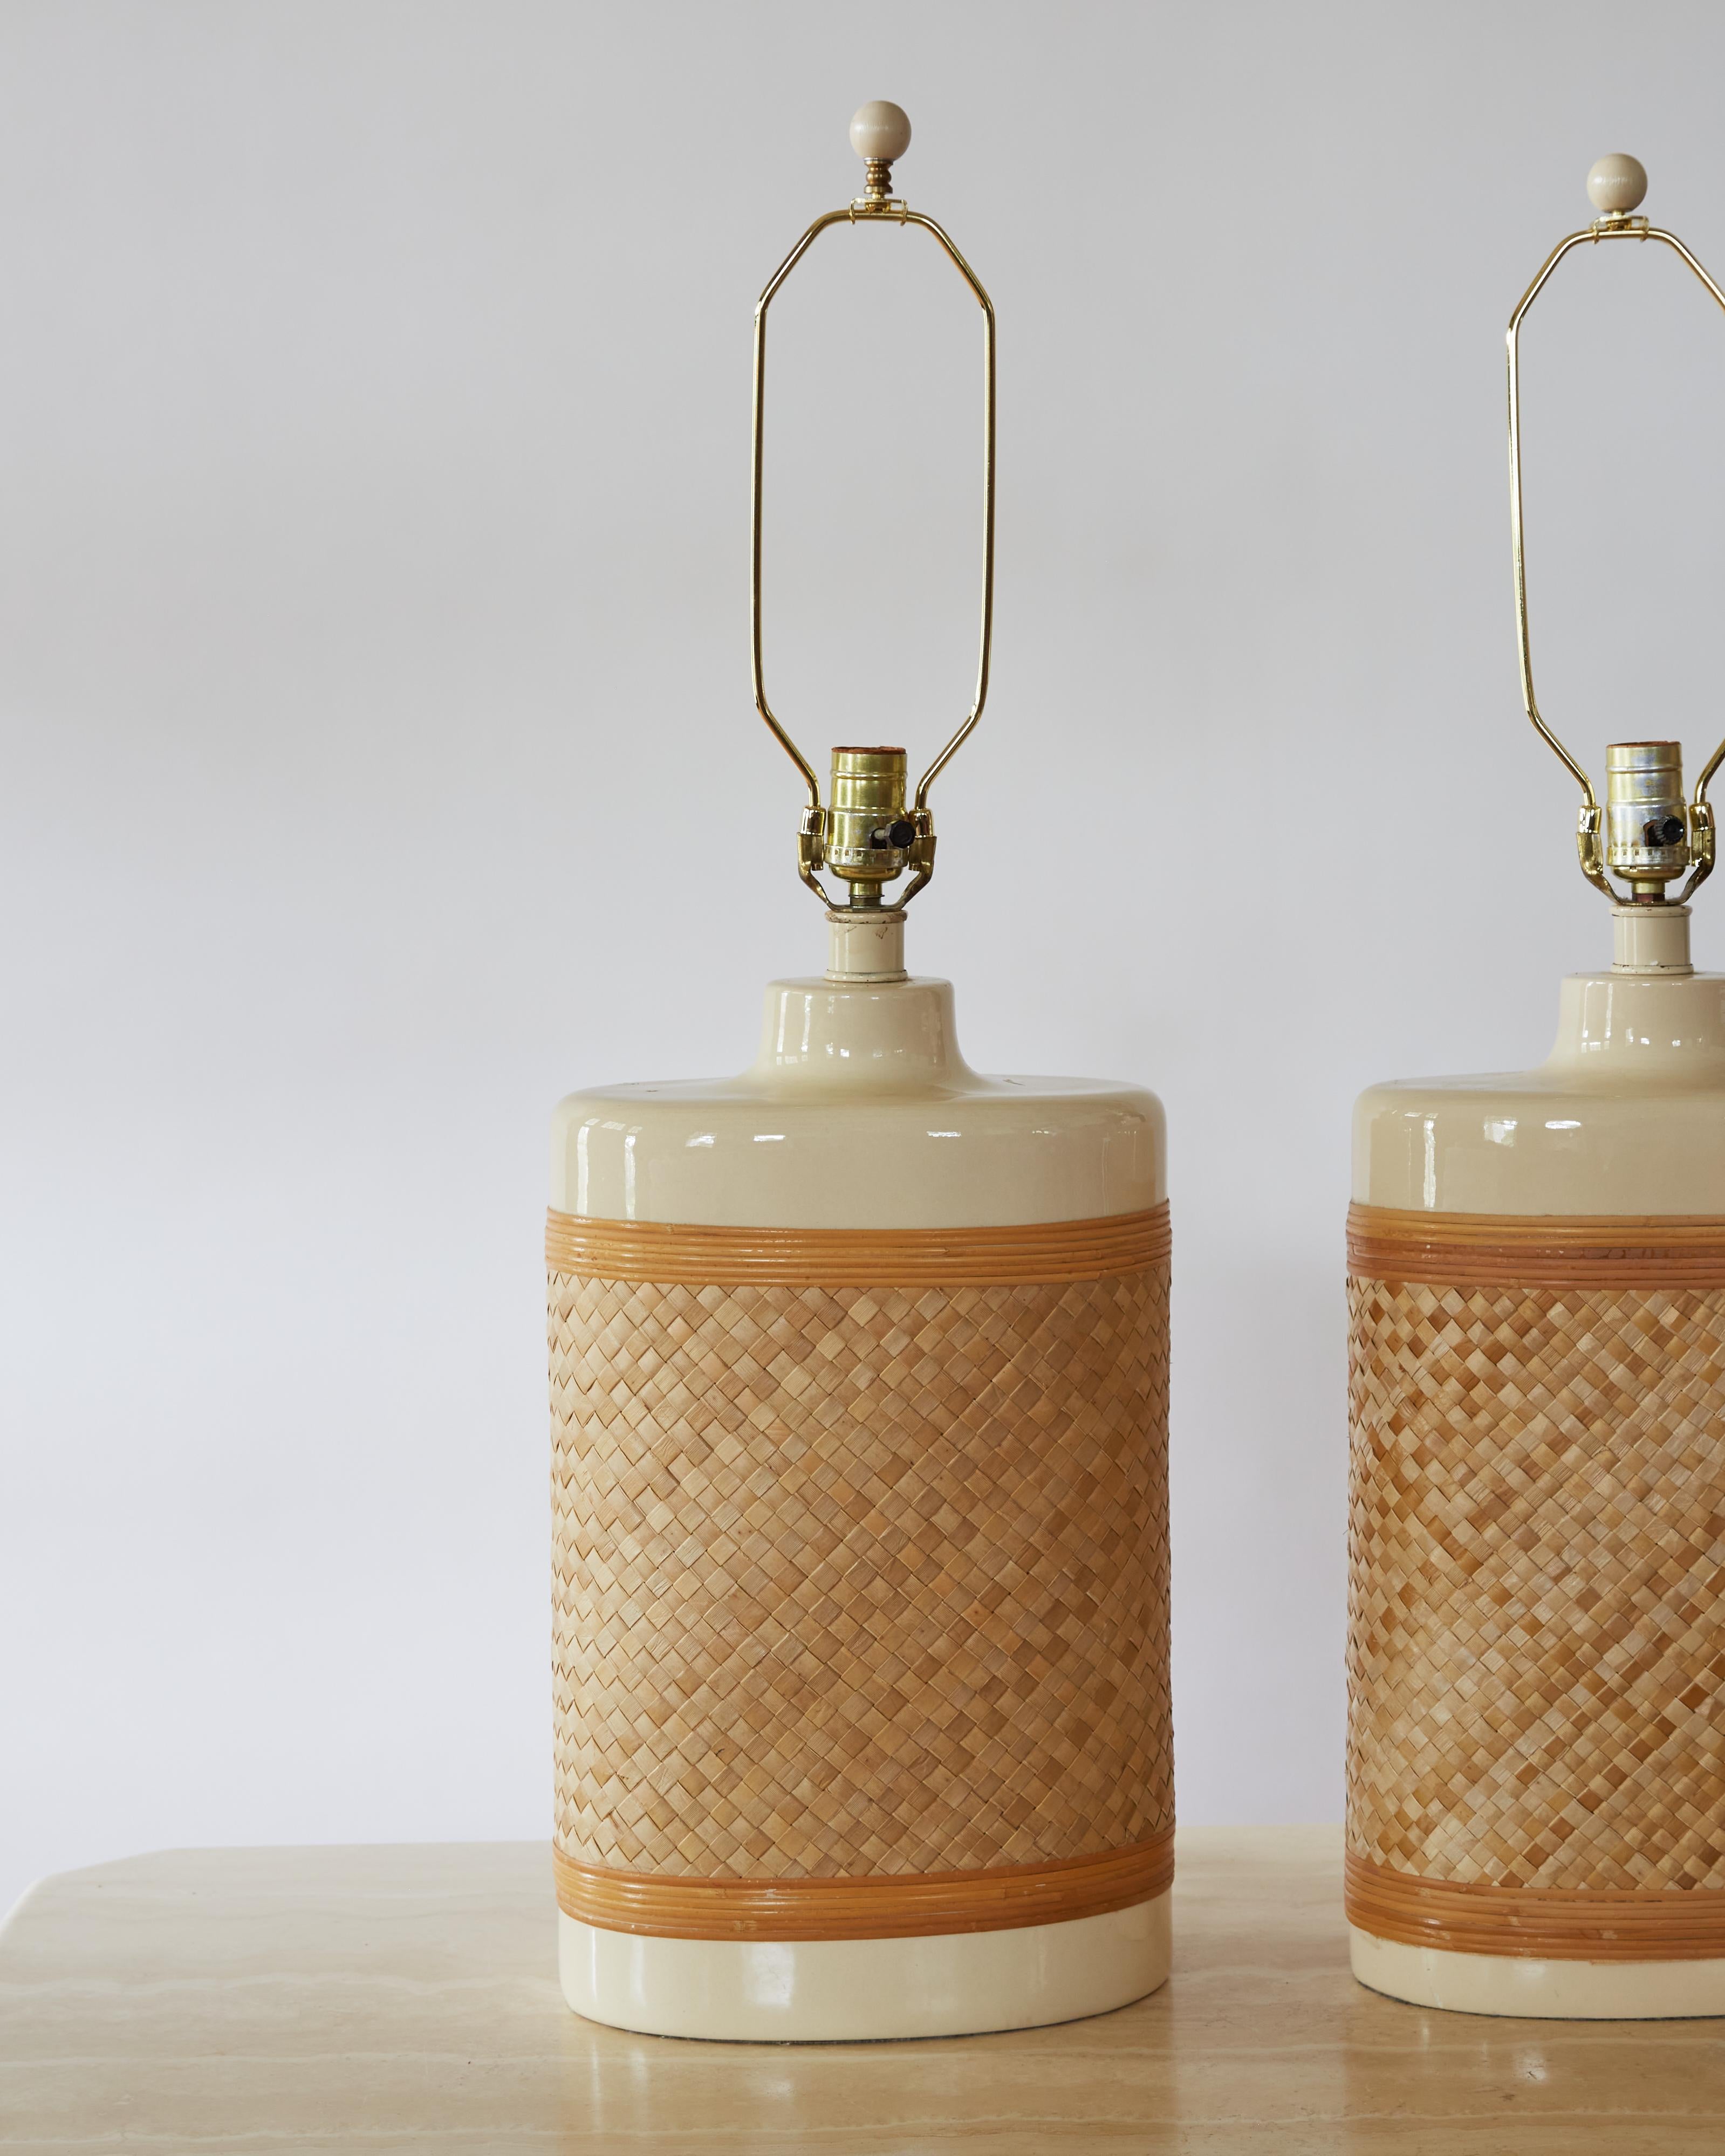 Introduce some coastal flair to a bedroom, living room, or den with this pair of vintage lamps. Oval in shape, the large body of the lamp is made of a cream-colored ceramic wrapped in woven raffia, and topped with a brass harp and finial. Wired for